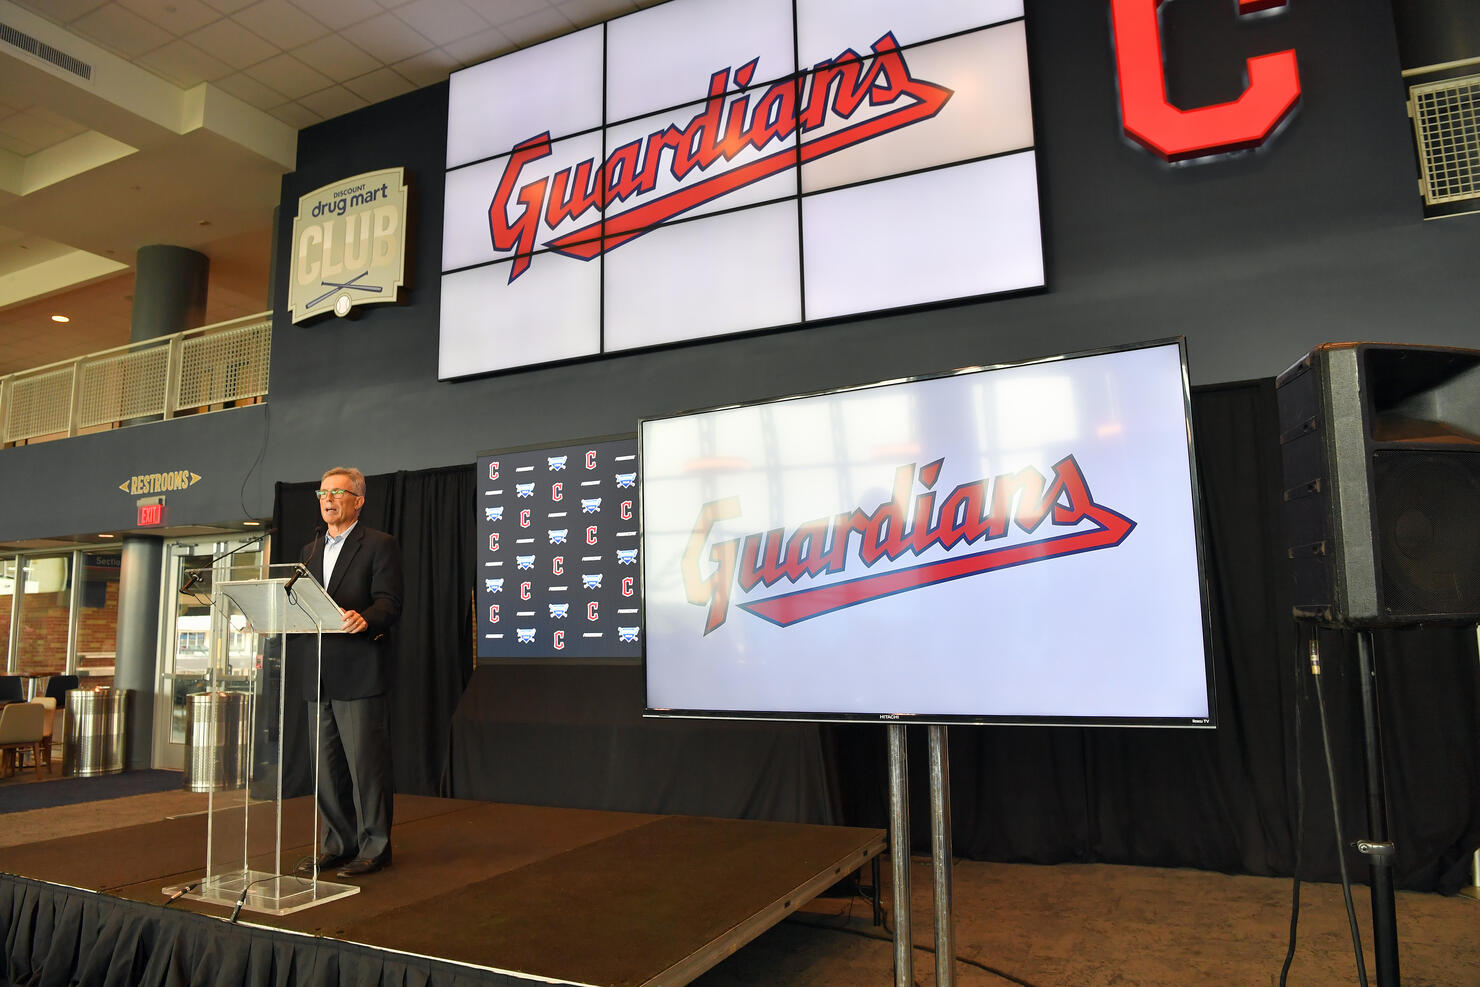 Cleveland's baseball team goes from Indians to Guardians